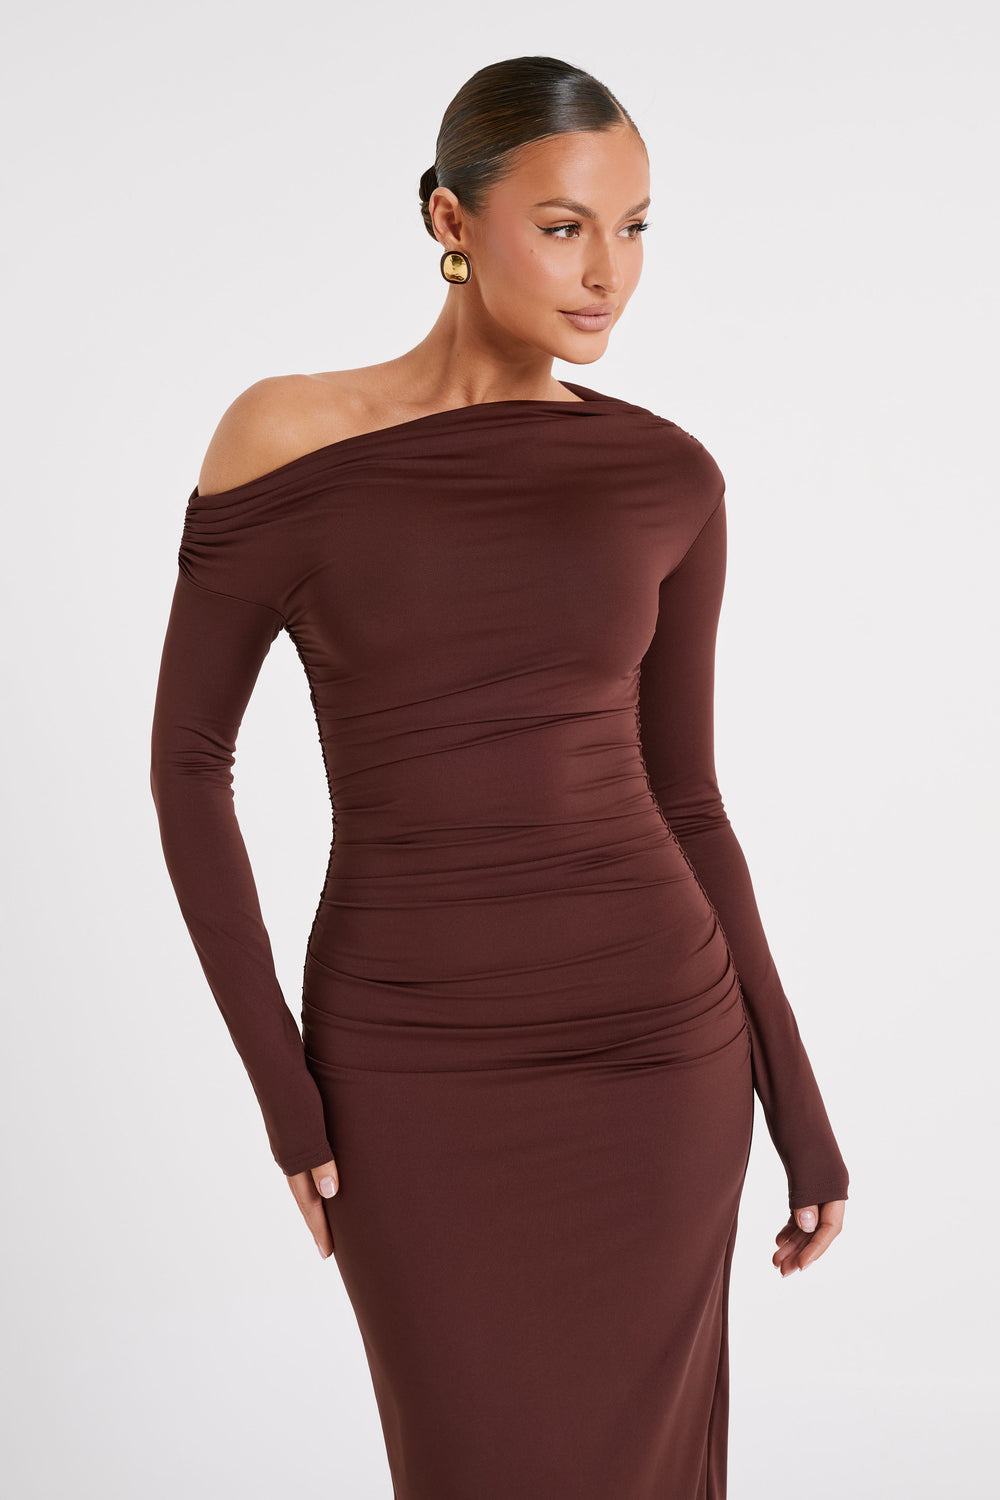 Christabel Recycled Nylon Ruched Midi Dress - Chocolate